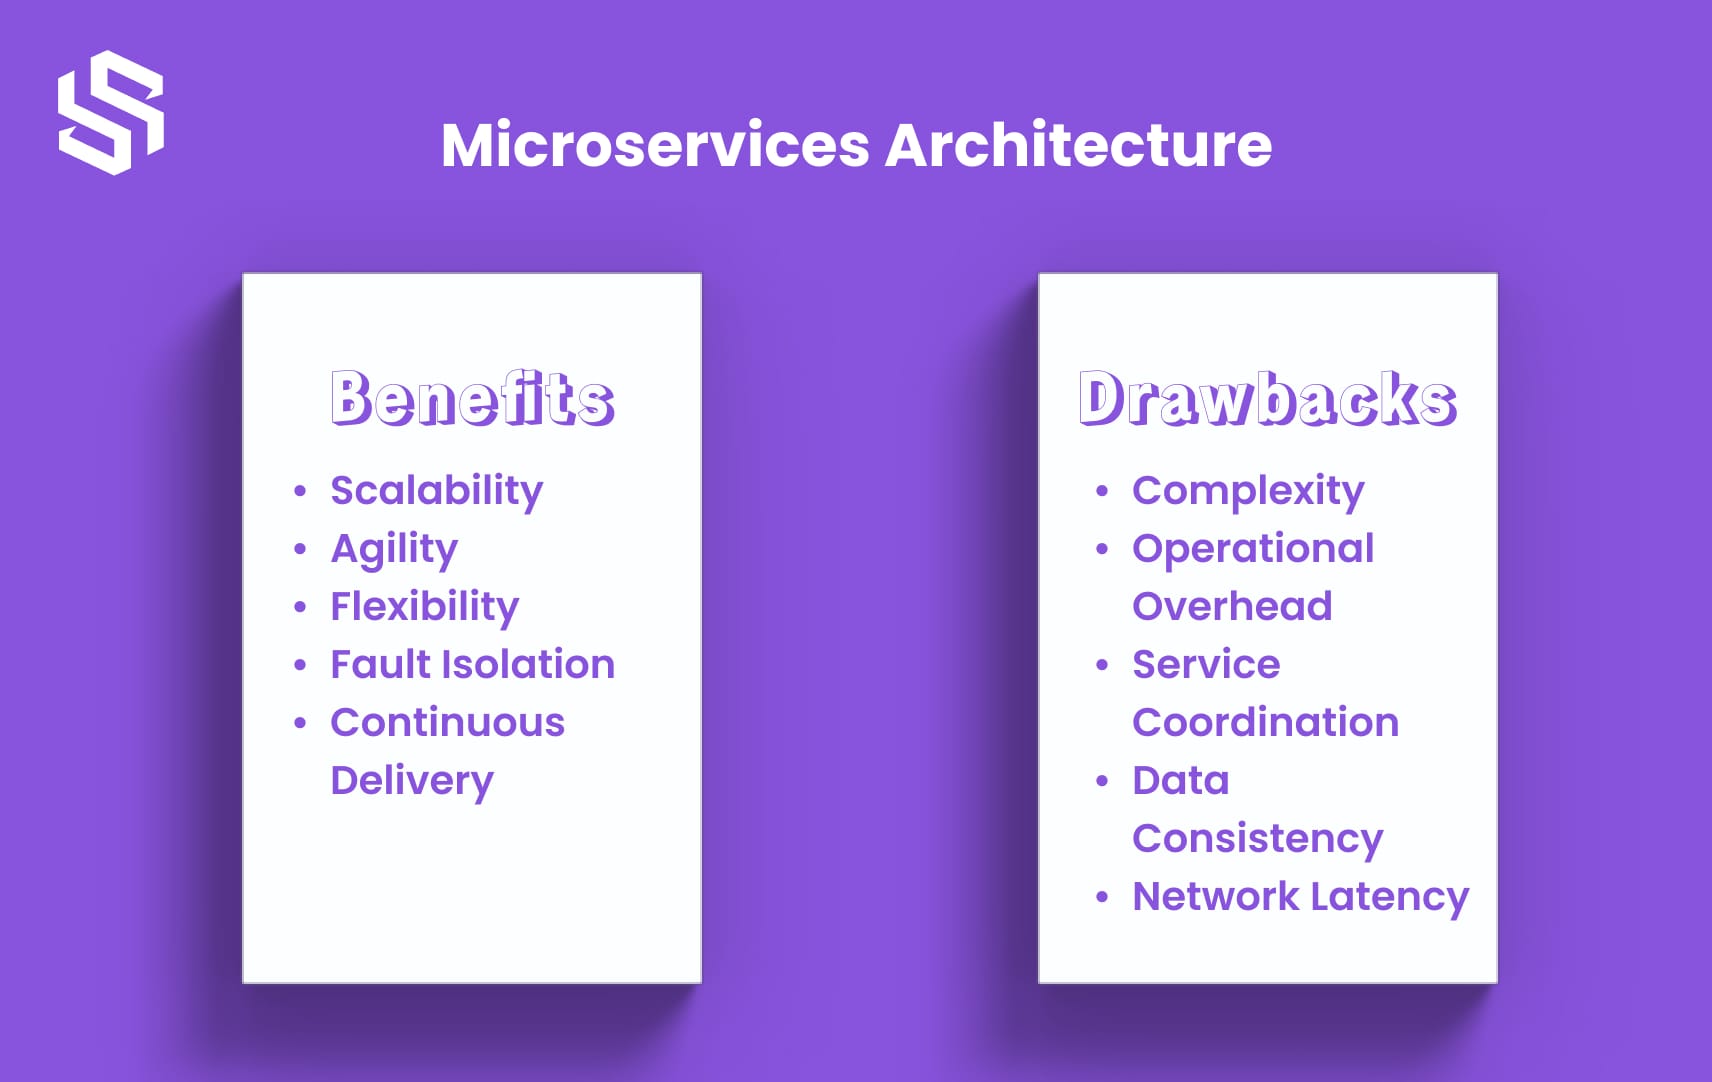 Benefits and Drawbacks of Microservices Architecture